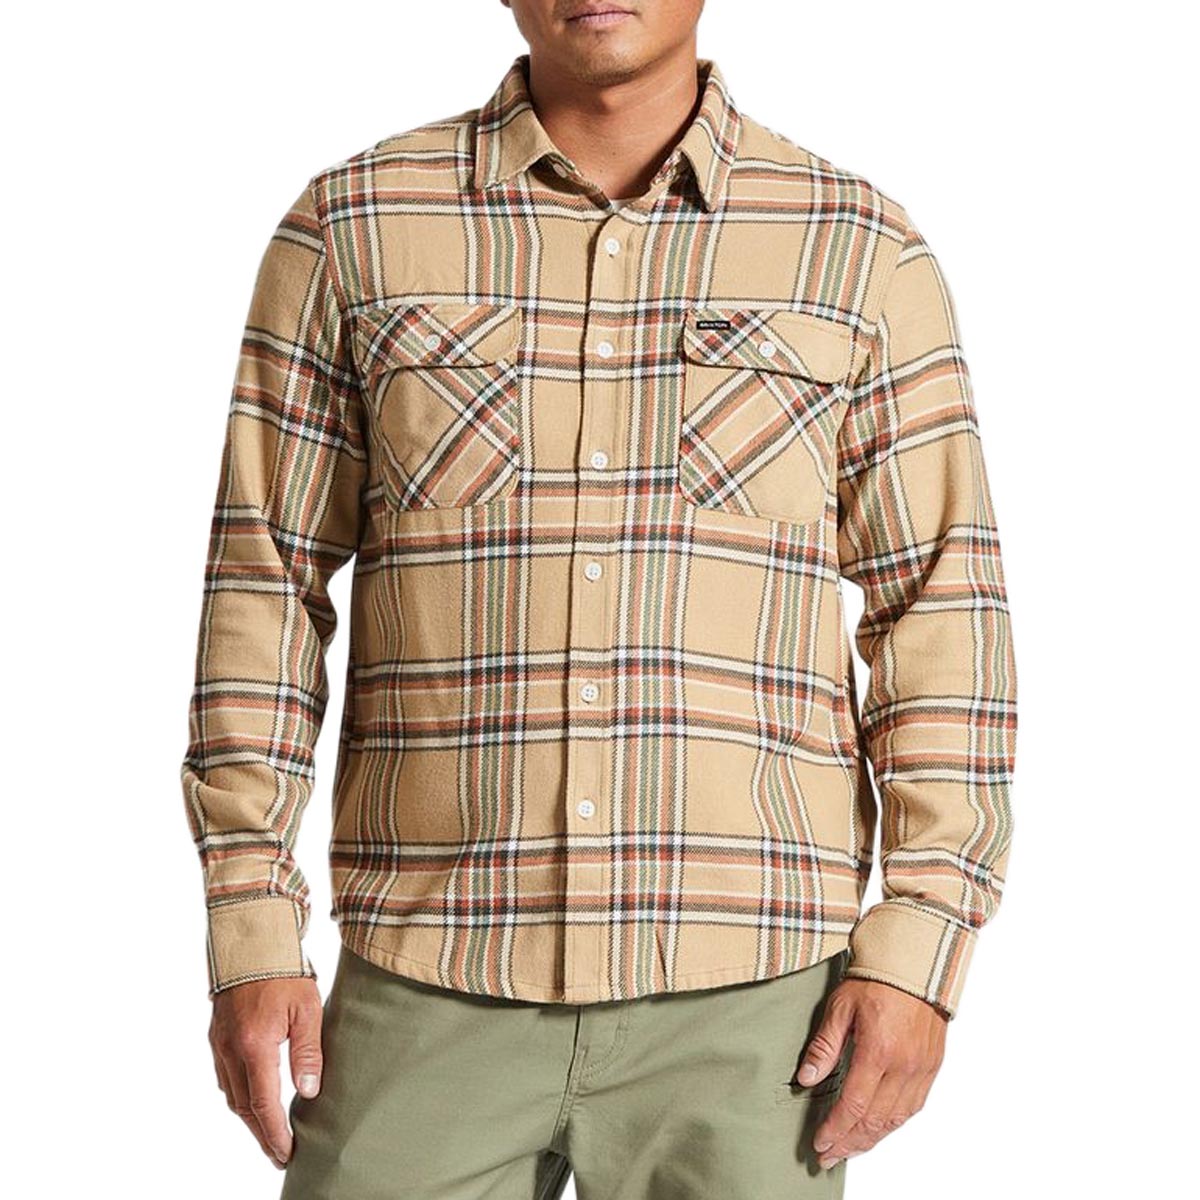 Brixton Bowery Flannel Long Sleeve Shirt - Sand/Off White/Terracotta image 1